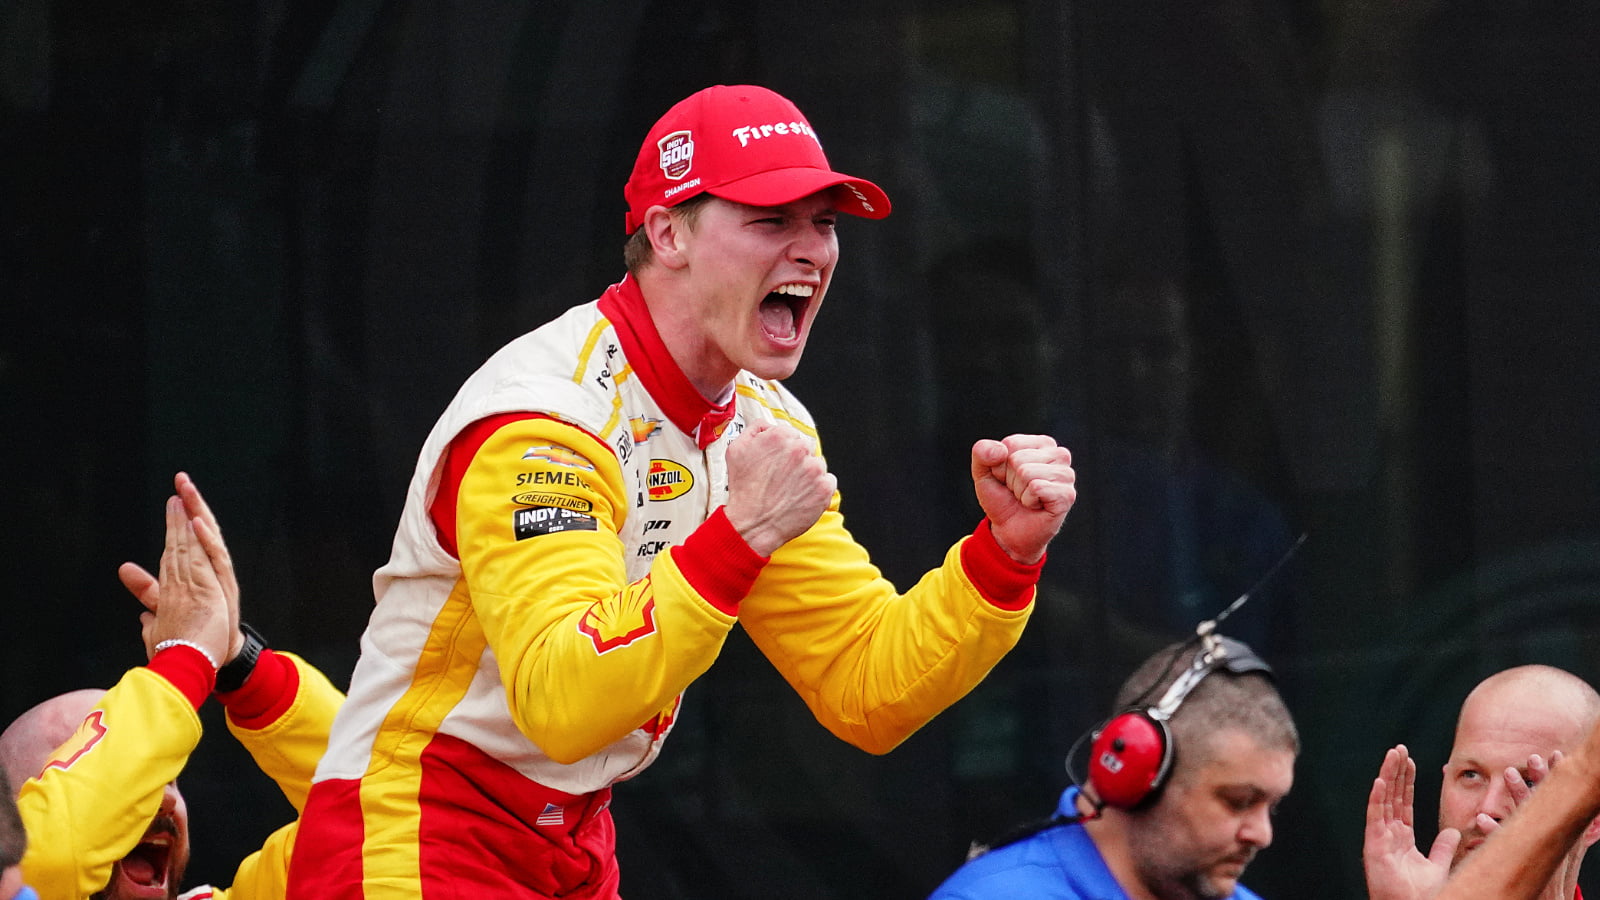 Newgarden's Triumph: A Spectacular Repeat Victory at the Rain-Delayed Indy 500